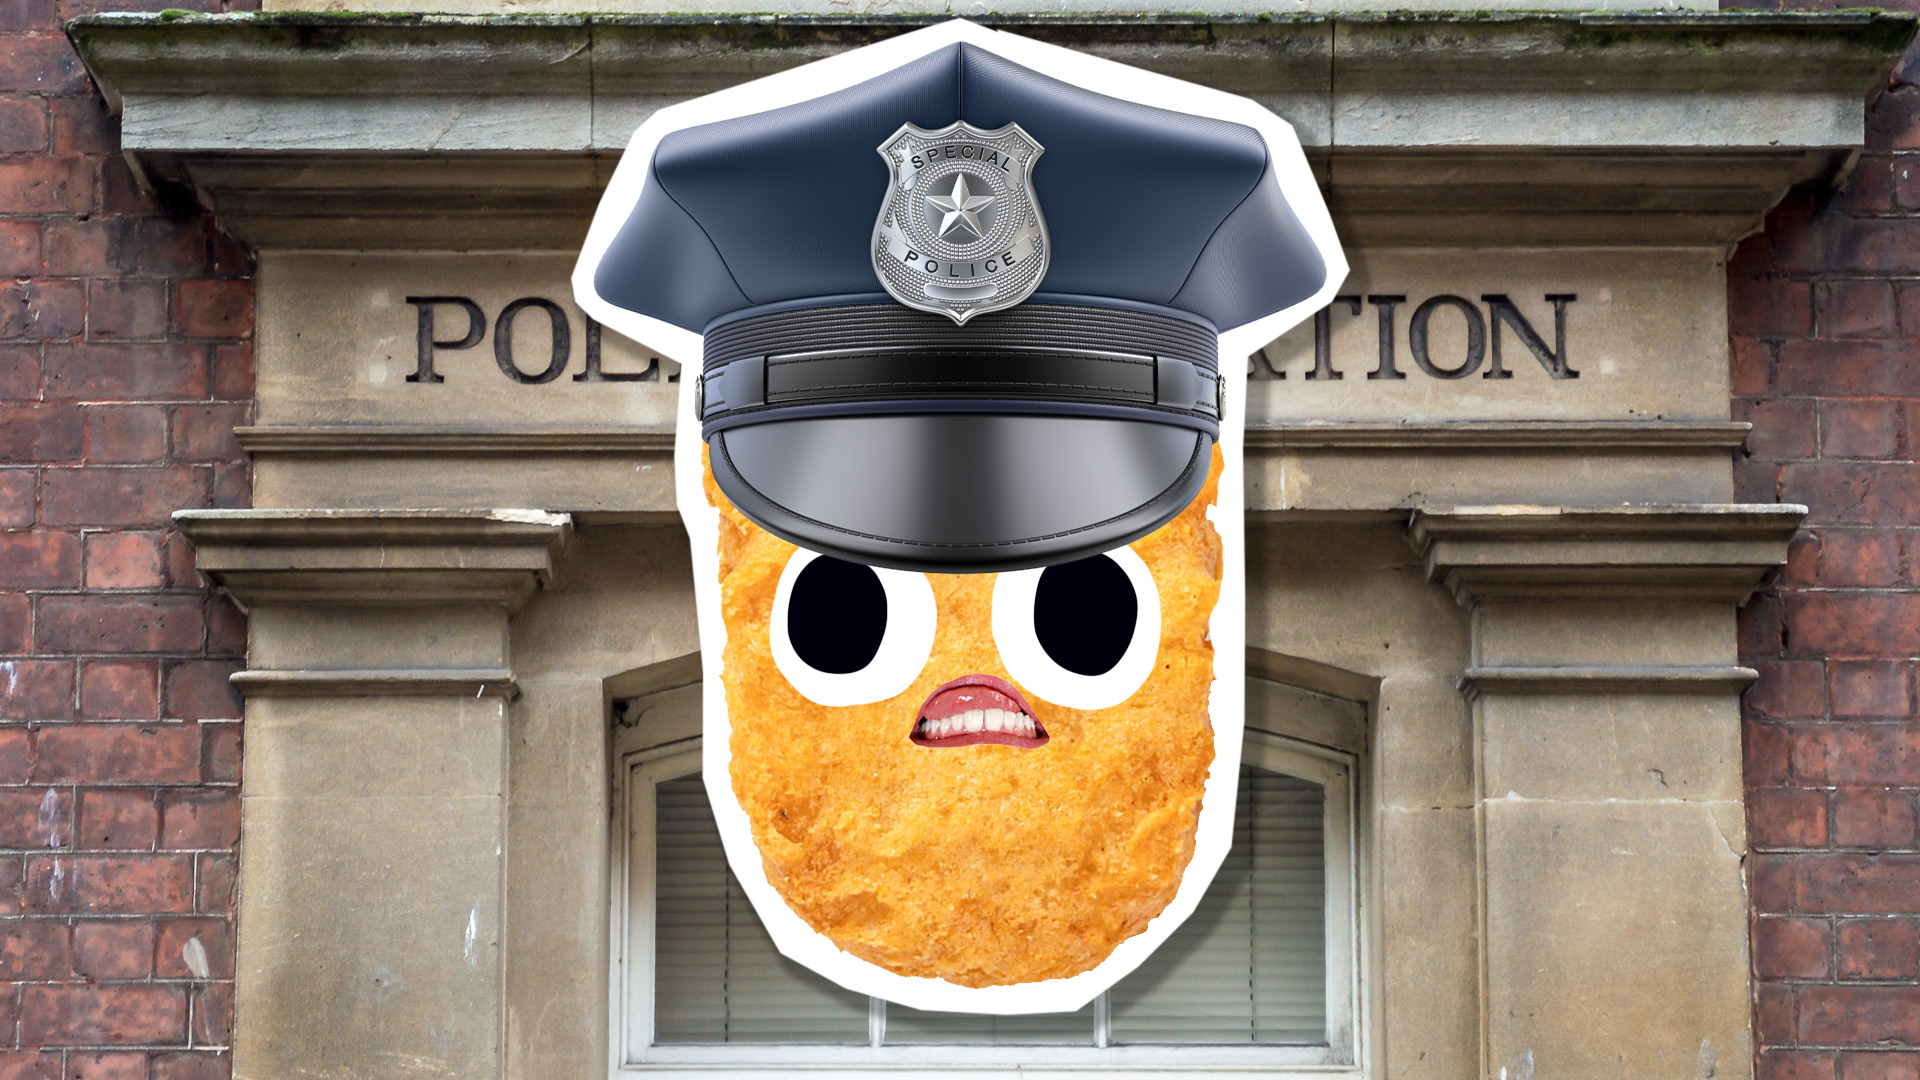 A chicken nugget wearing a police hat